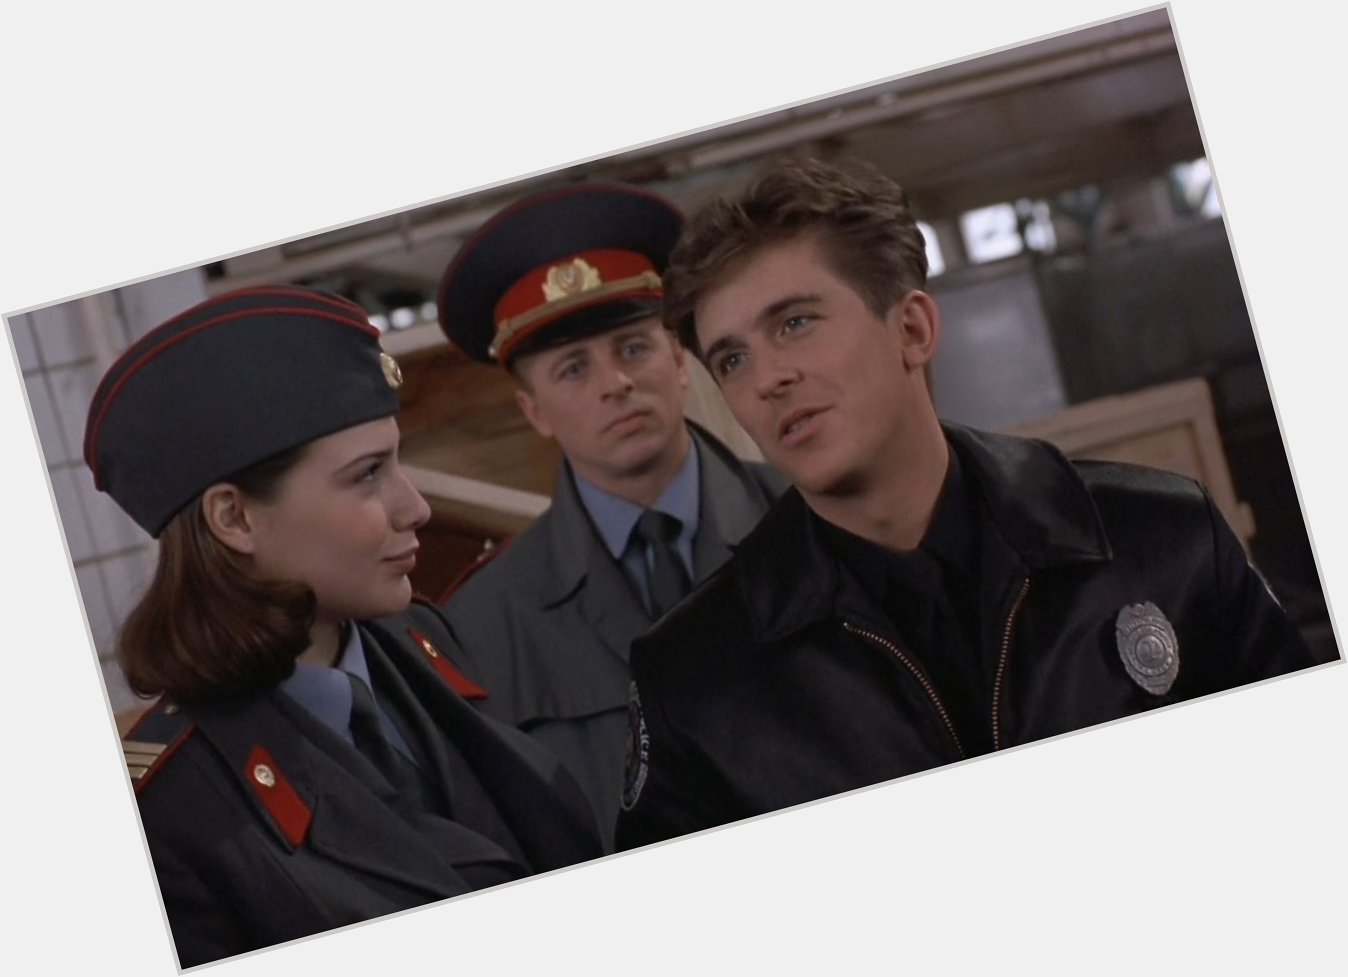 Happy birthday to substitute Mahoney Charlie Schlatter. Now playing POLICE ACADEMY: MISSION TO MOSCOW. 